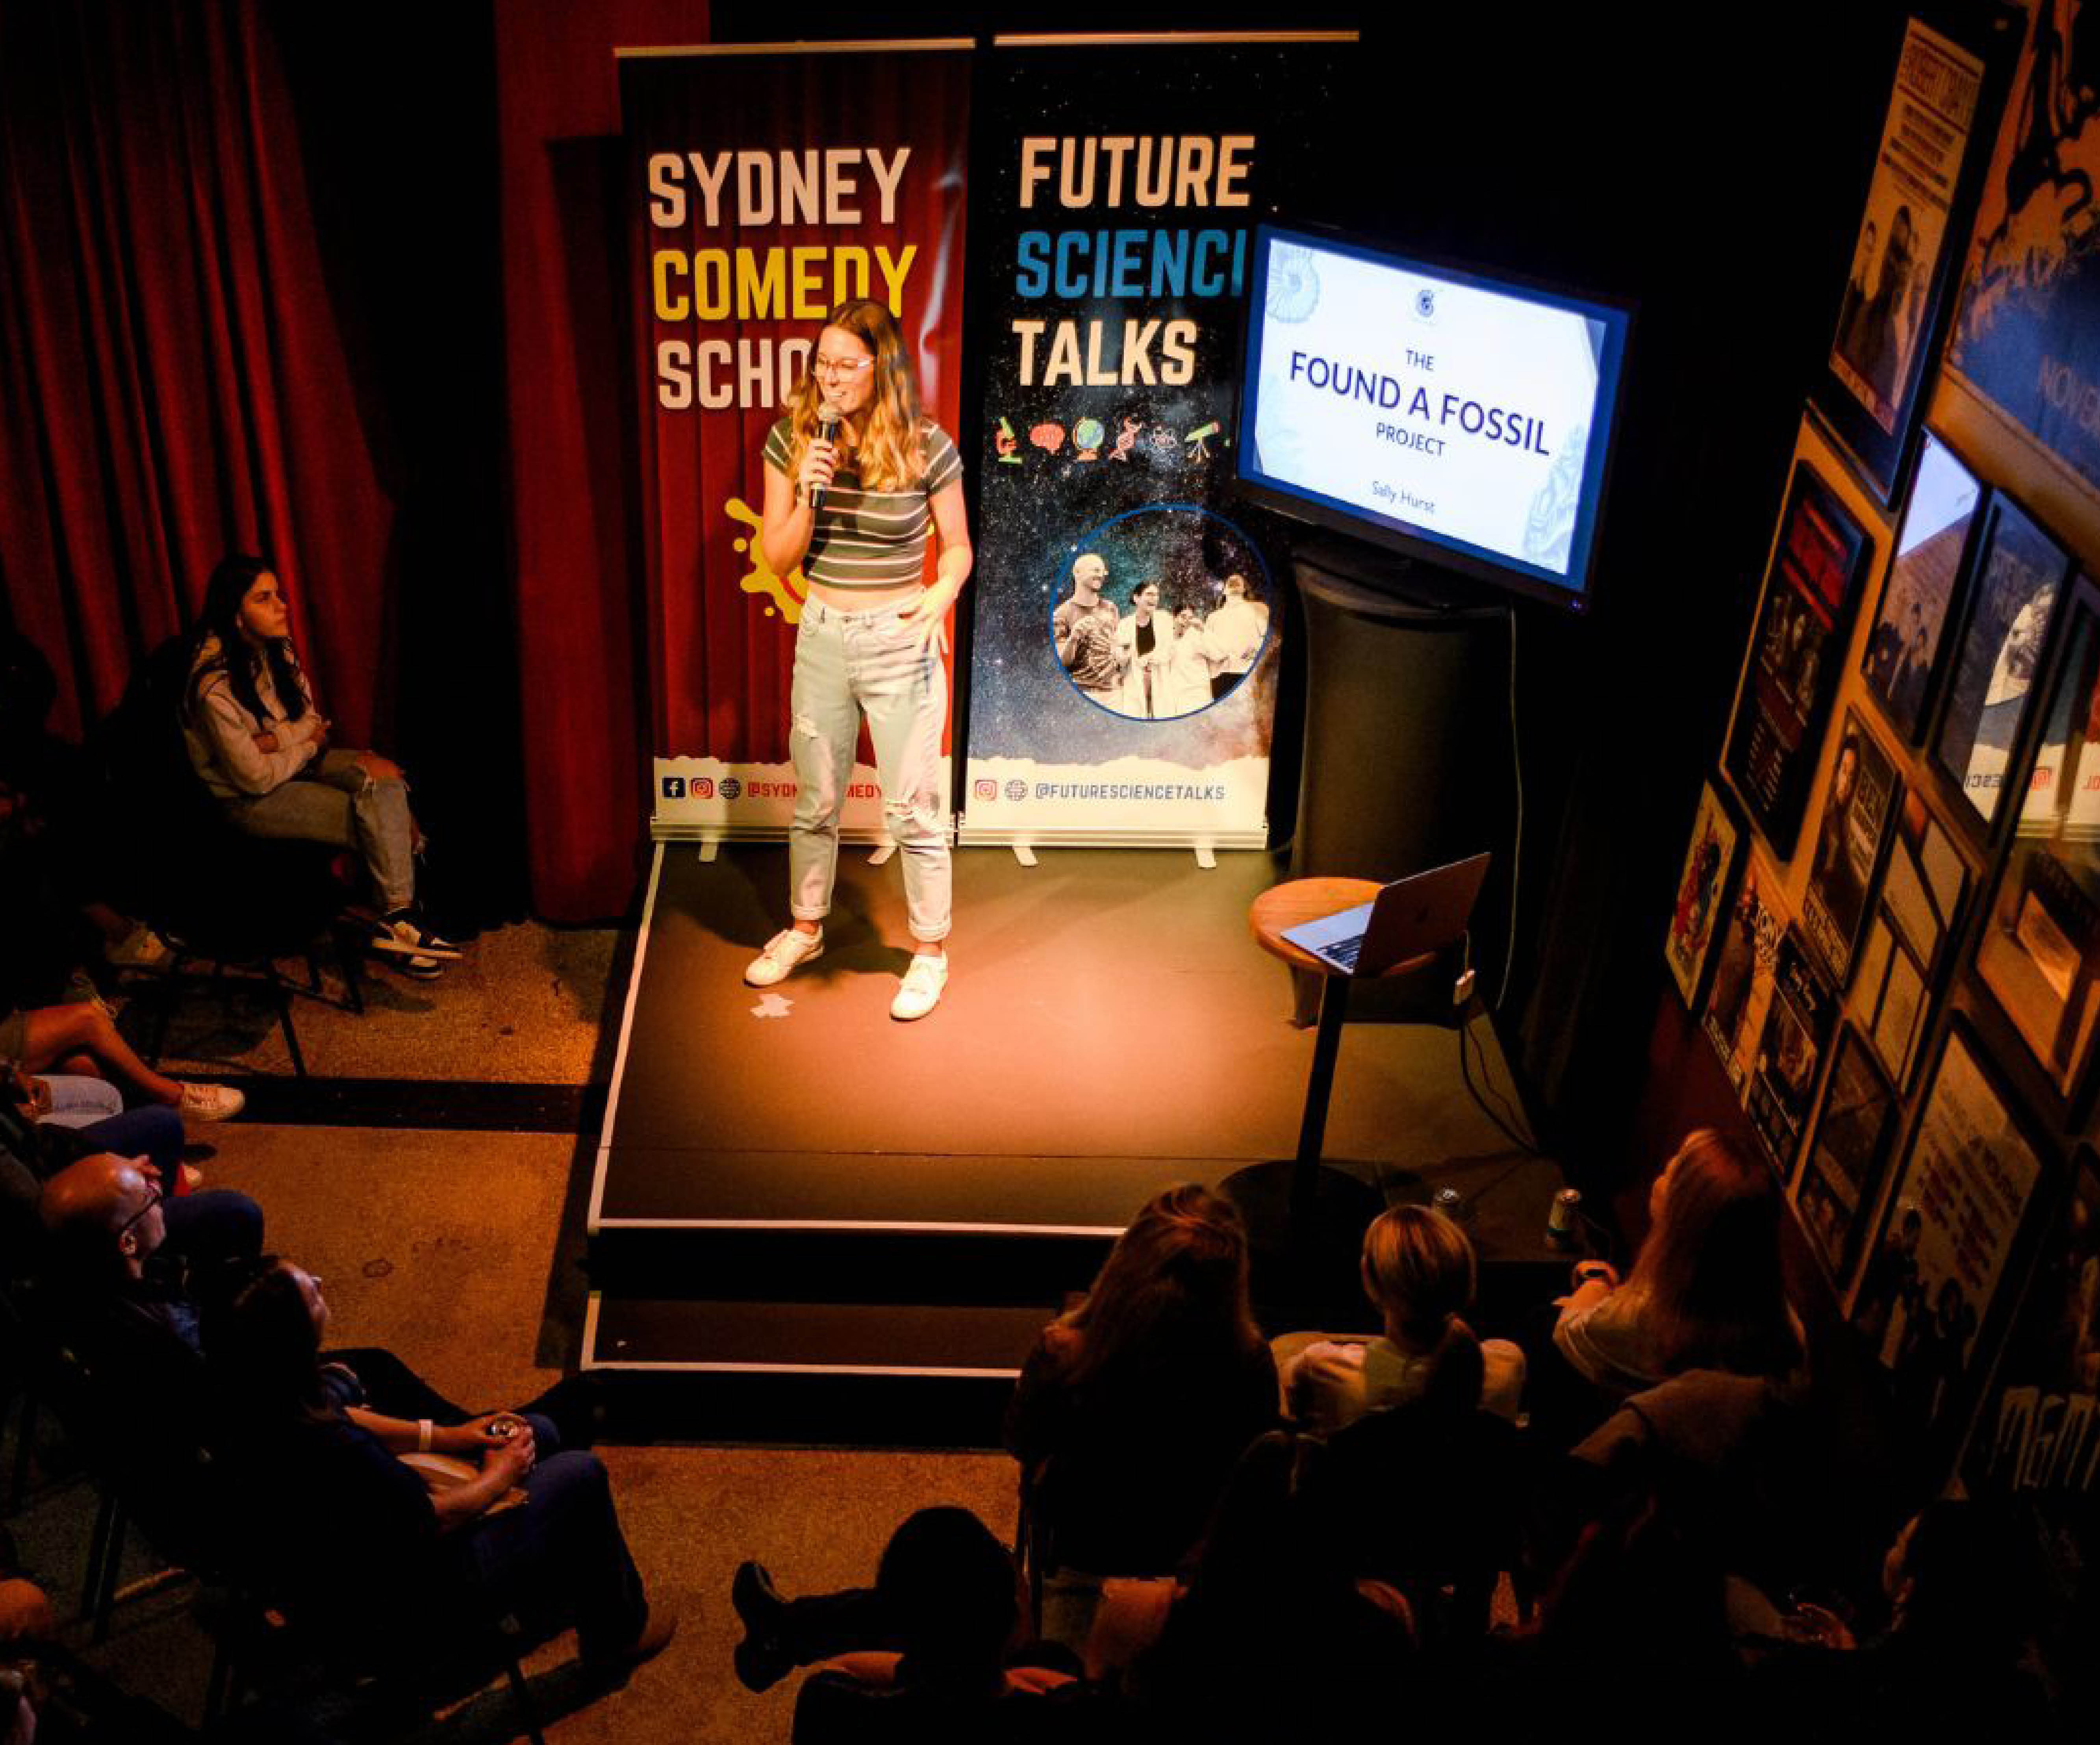 Future Science Talks is partnering with Sutherland Shire Libraries for the second year in a row to deliver a night of science and laughs. Book your free ticket now!